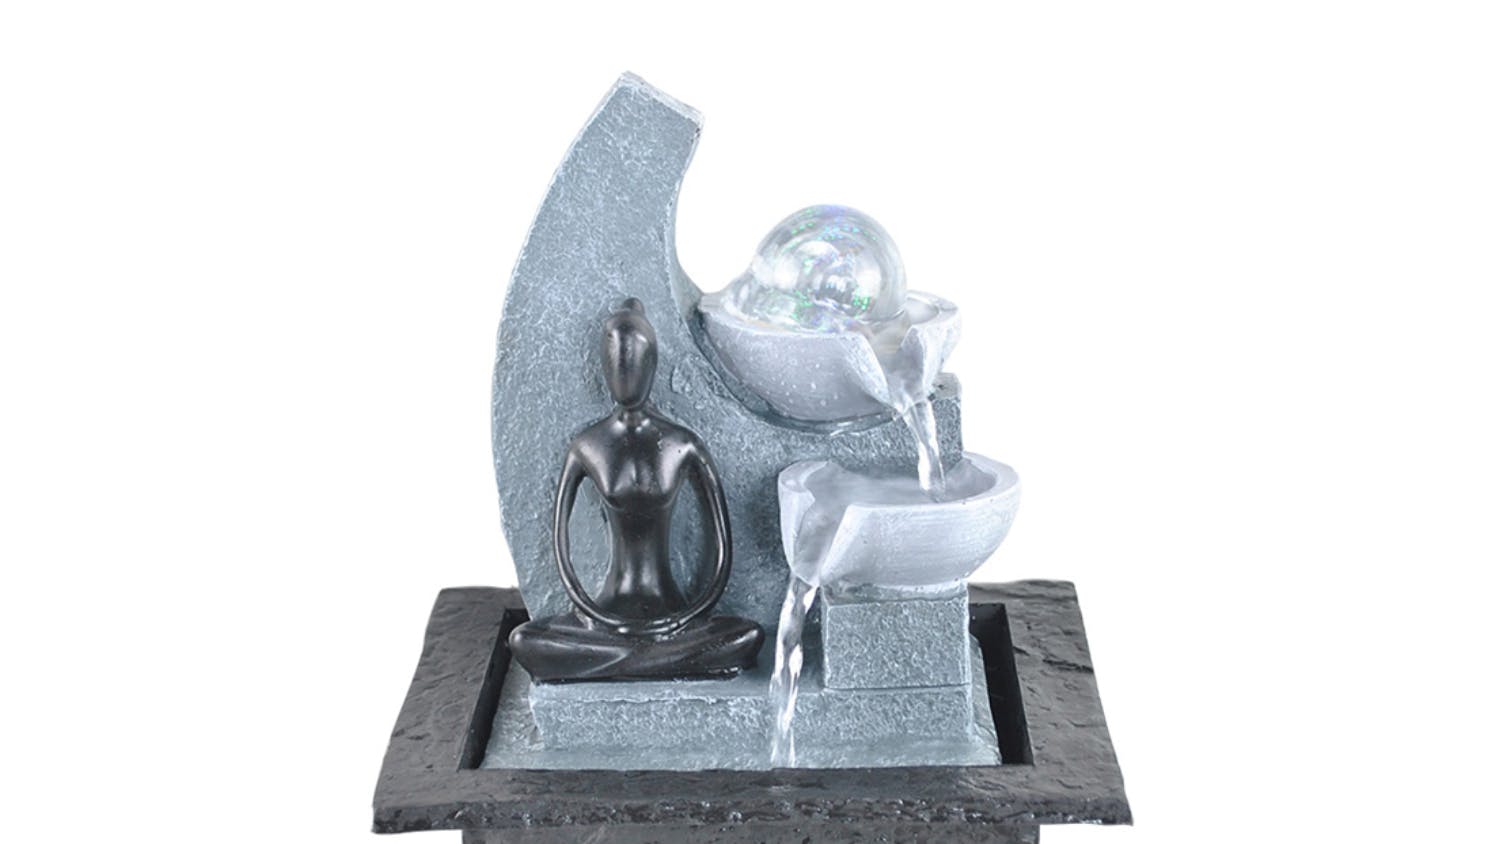 Water Feature Meditating Person 21 x 19 x 27cm - Grey